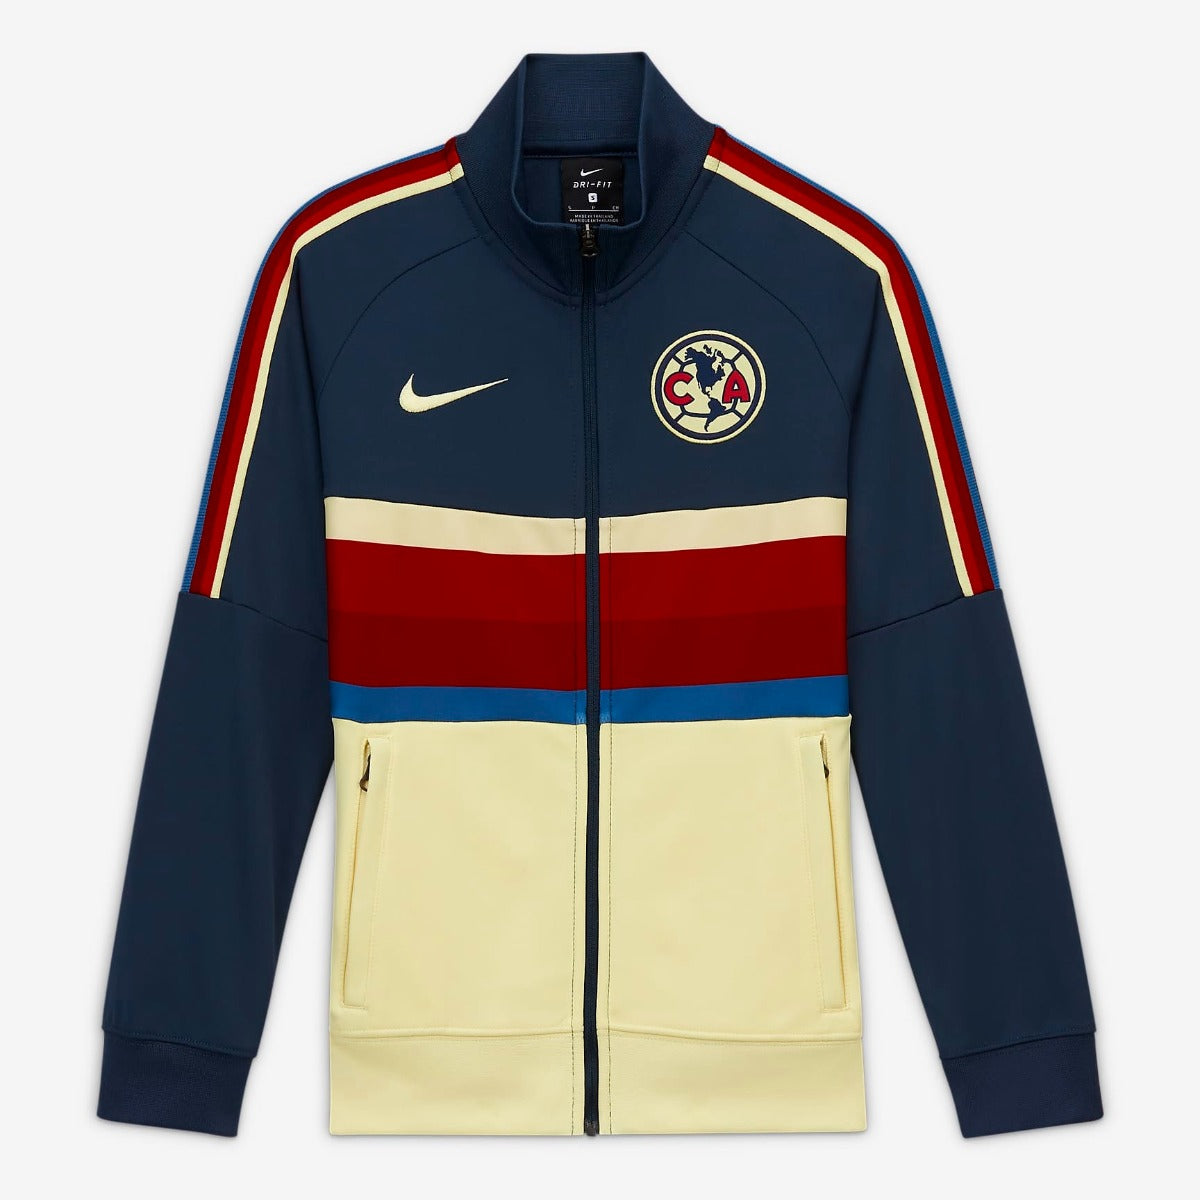 Nike 2020-21 Club America Youth Anthem Track Jacket - Navy-Yellow-Red